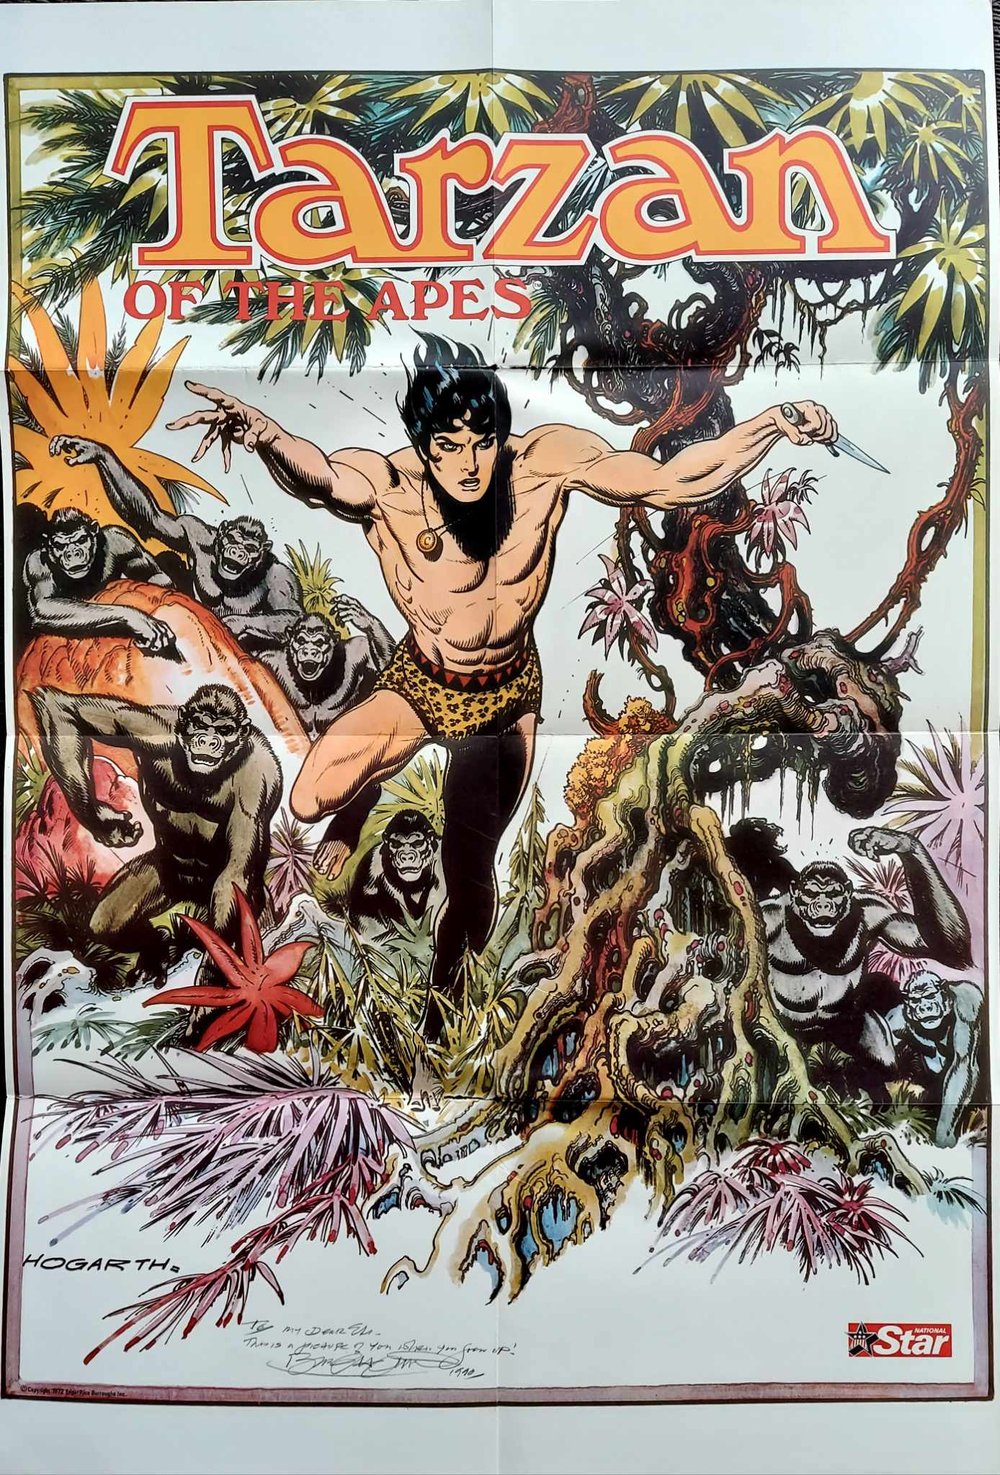 “Tarzan of the Apes” Poster by Burne Hogatrth - SIGNED